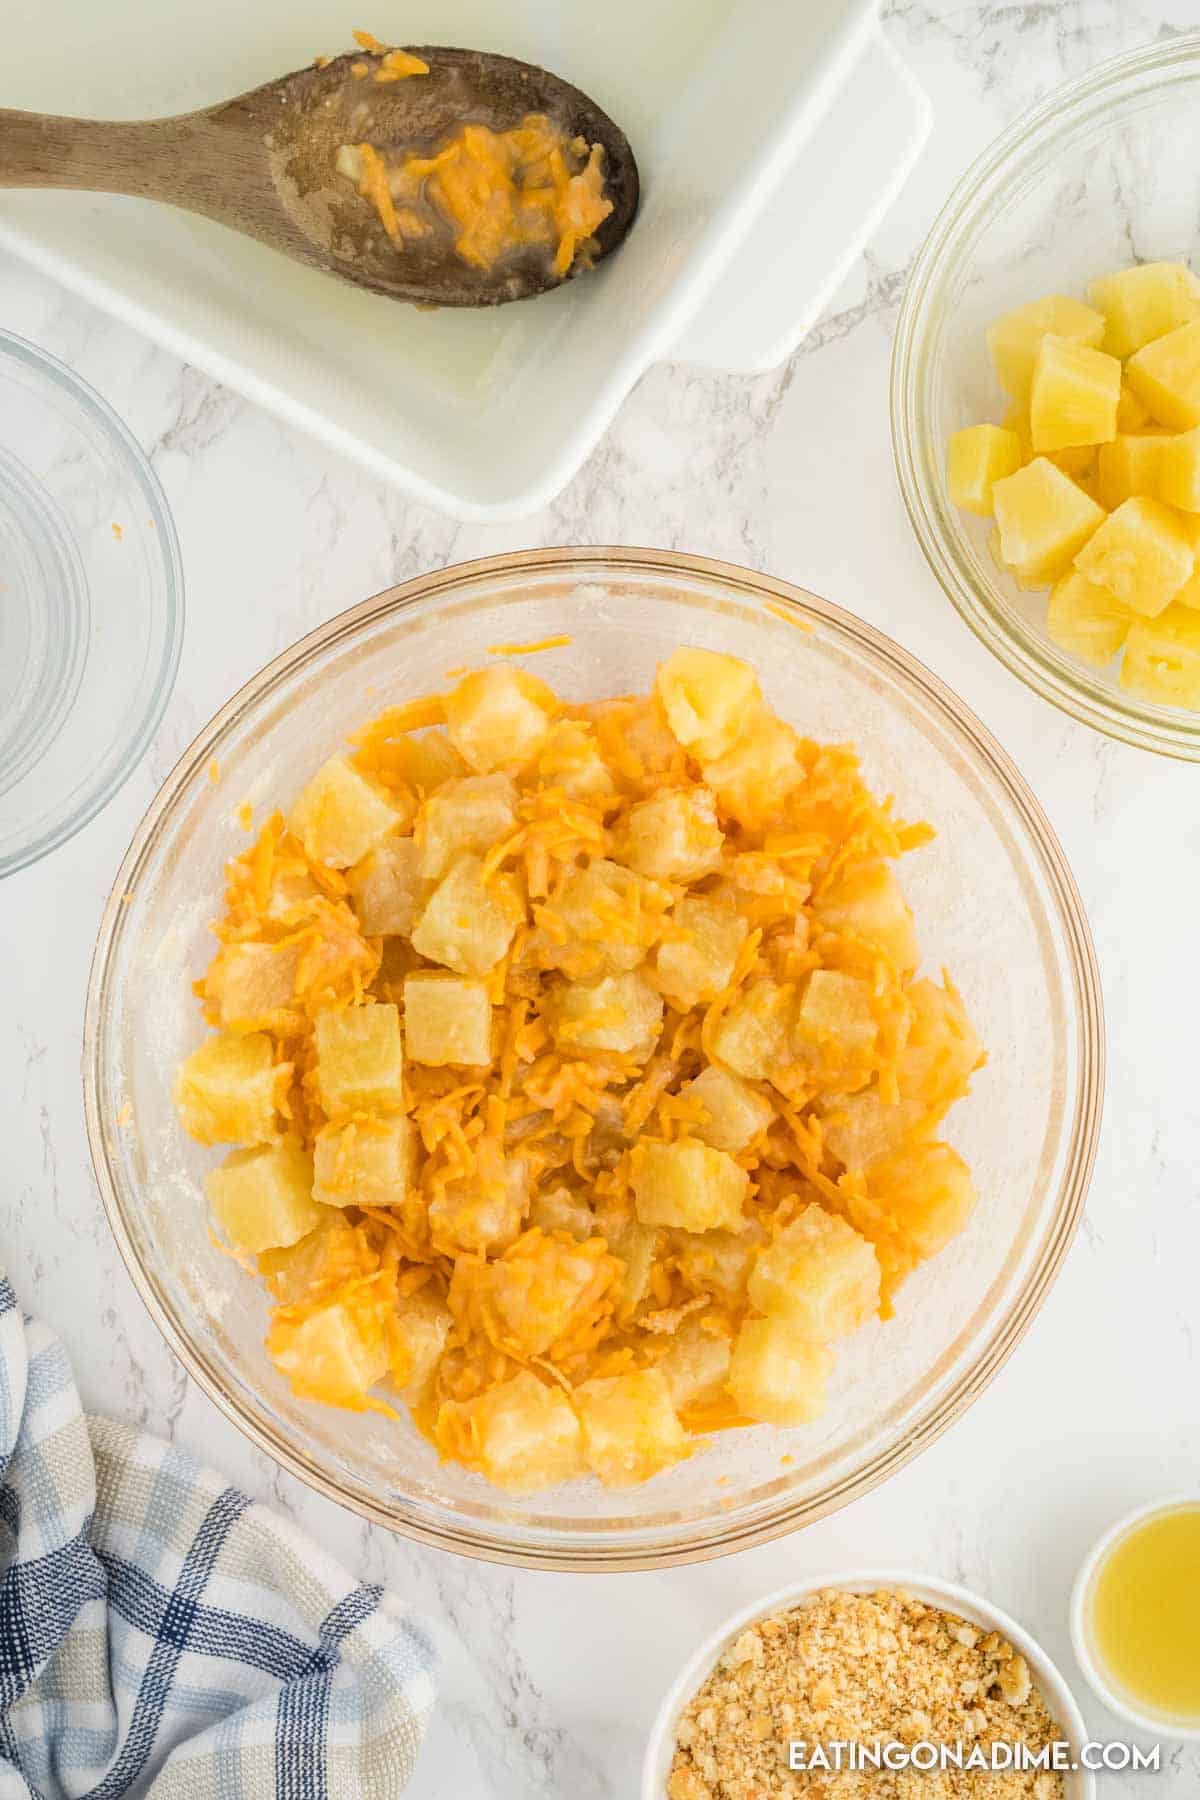 Then stir in pineapple chunks with the flour mixture